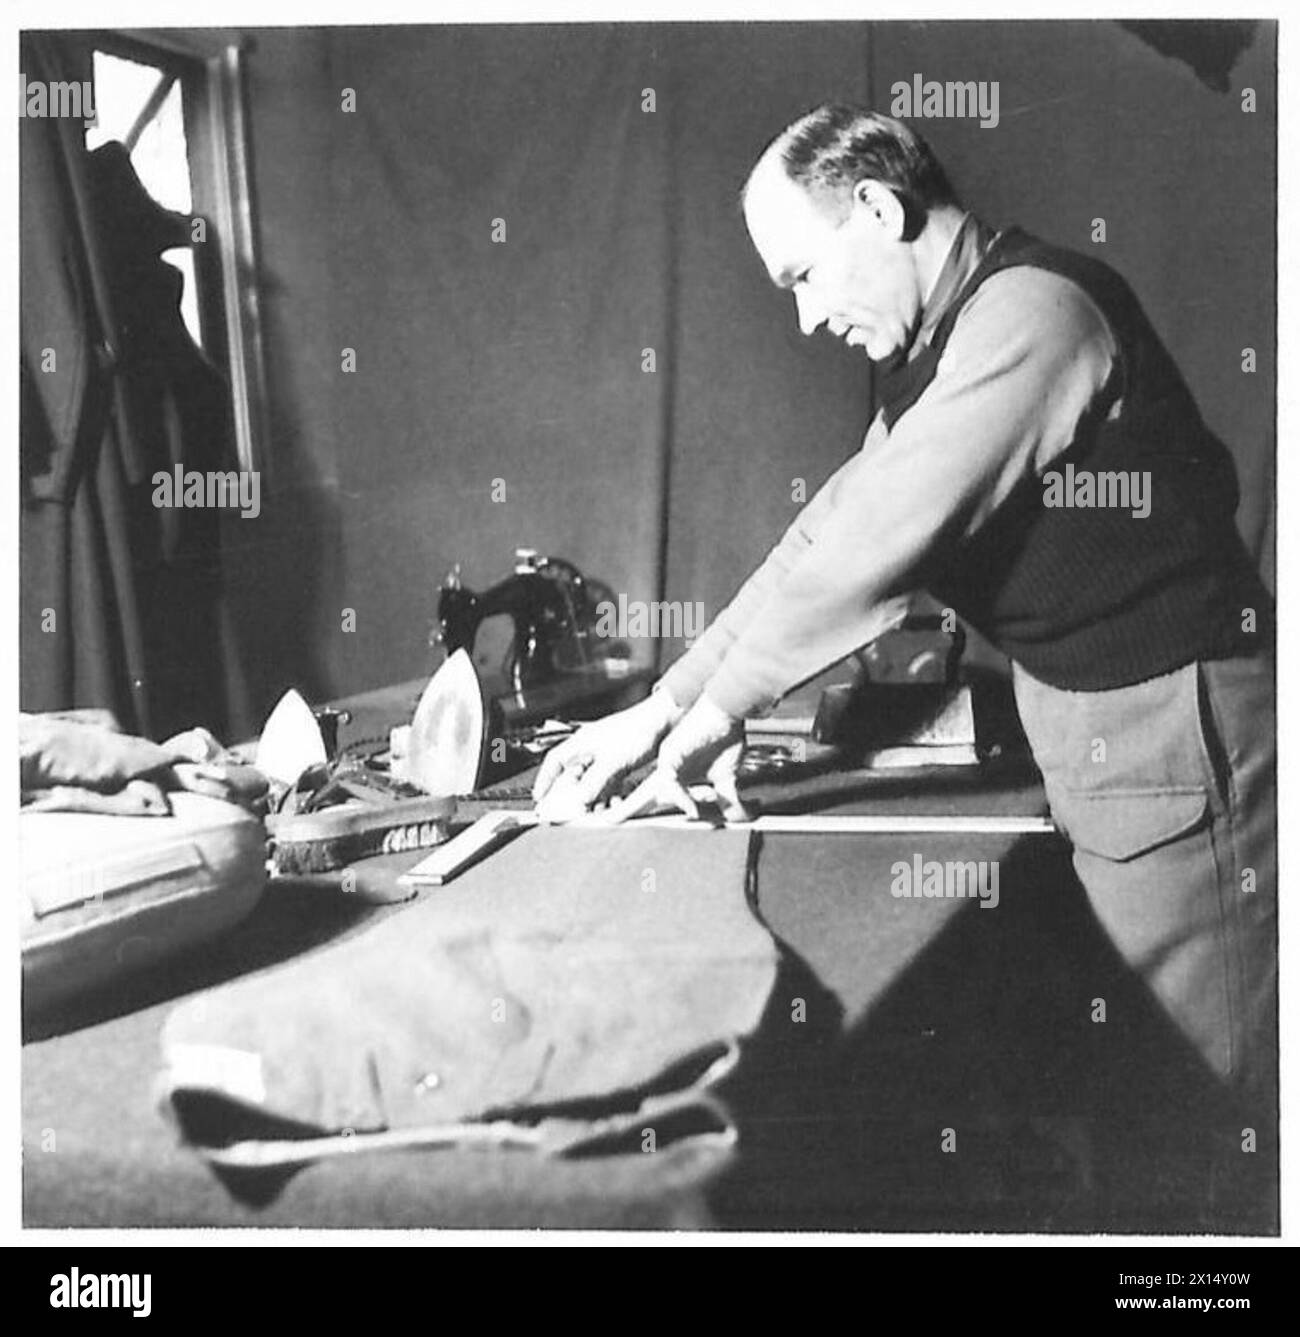 THE POLISH ARMY IN BRITAIN, 1940-1947 - Tailor of one of the Brigade units repairing and altering uniforms for the officers and men. Photograph taken at Perth. A special series of photographs dealing with the domestic and social life of troops of the 1st Polish Rifle Brigade (1st Polish Corps) in Scotland where the officers and men are firmly established favourites with the local people. Some of the young soldiers were attending universities in Poland when war broke out. On arrival in Britain they joined the Polish Forces and continued their studies at the St Andrews University in order to fin Stock Photo